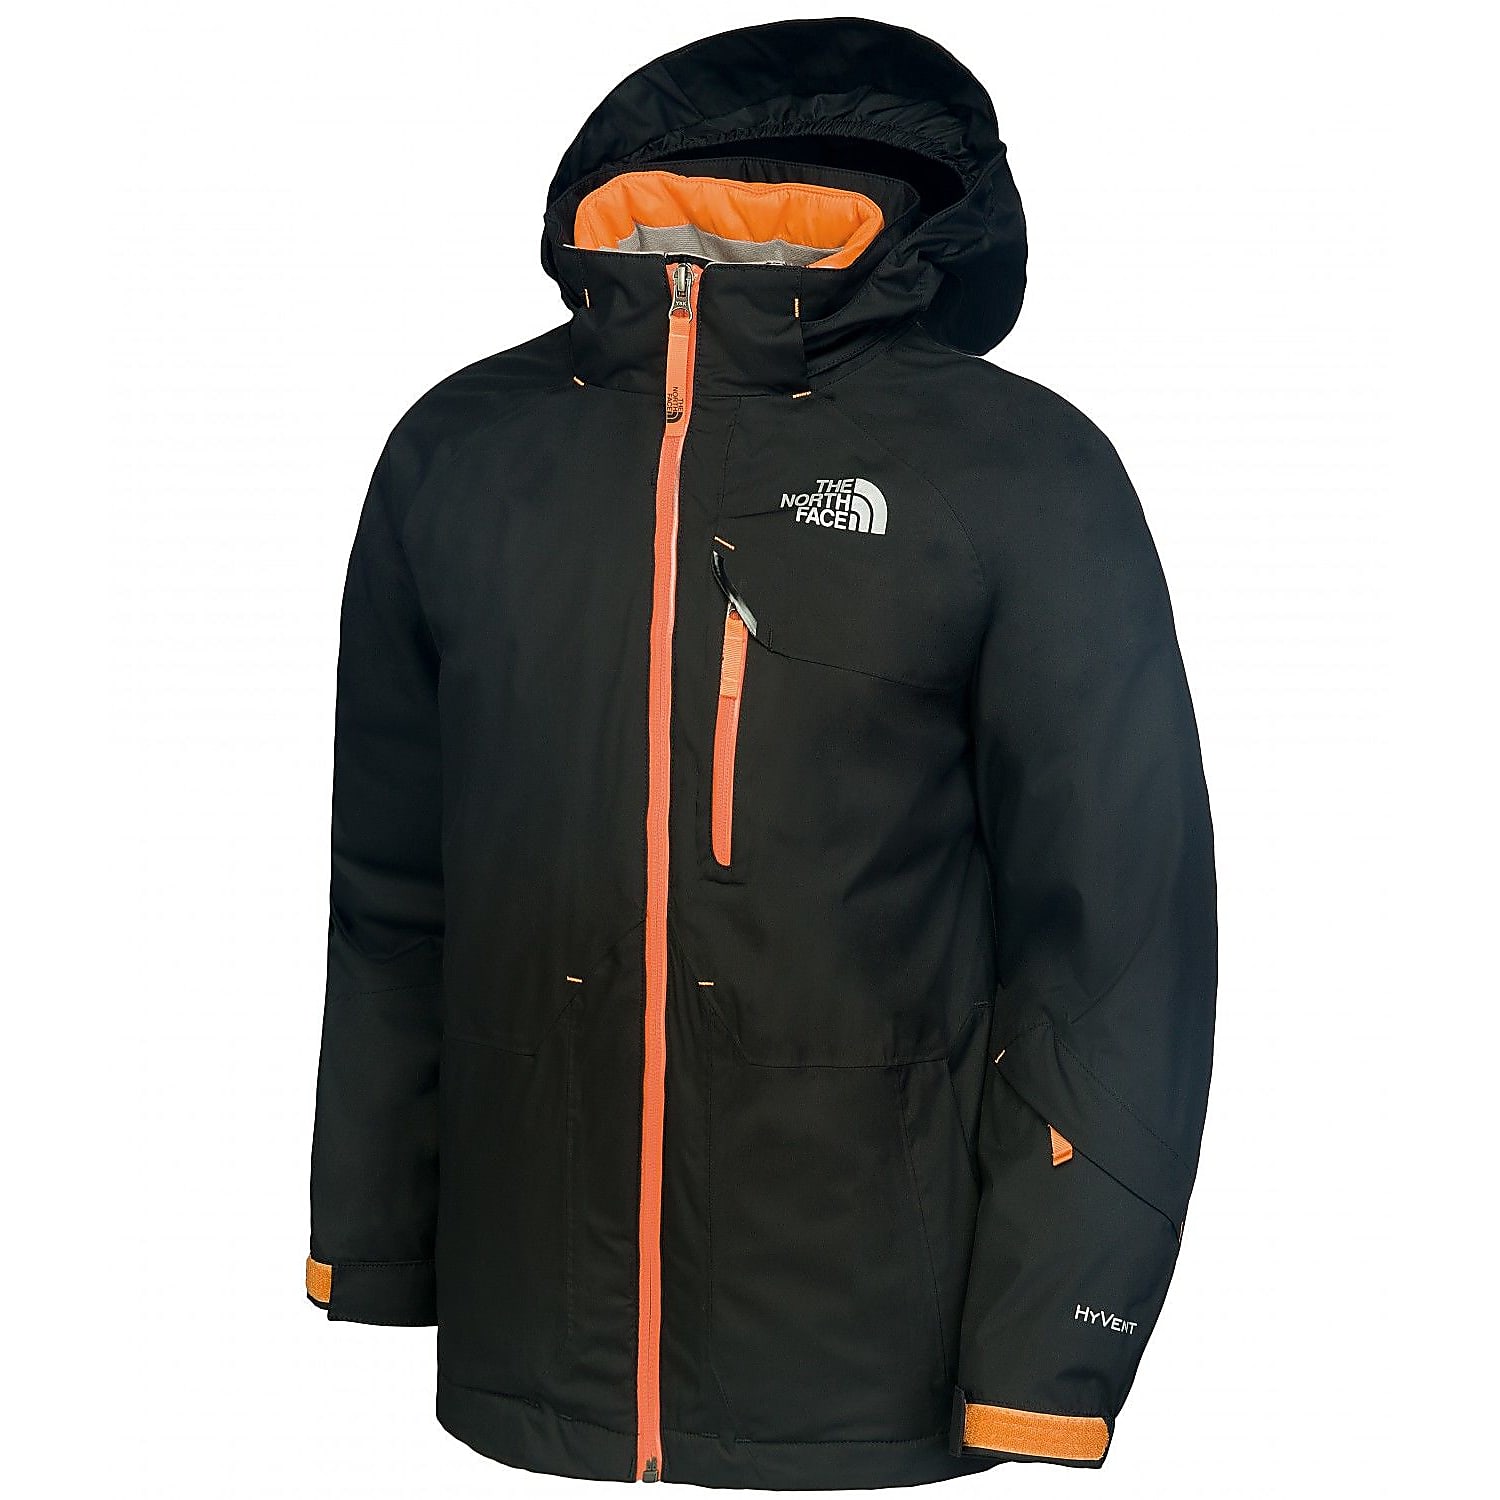 the north face orange and black jacket